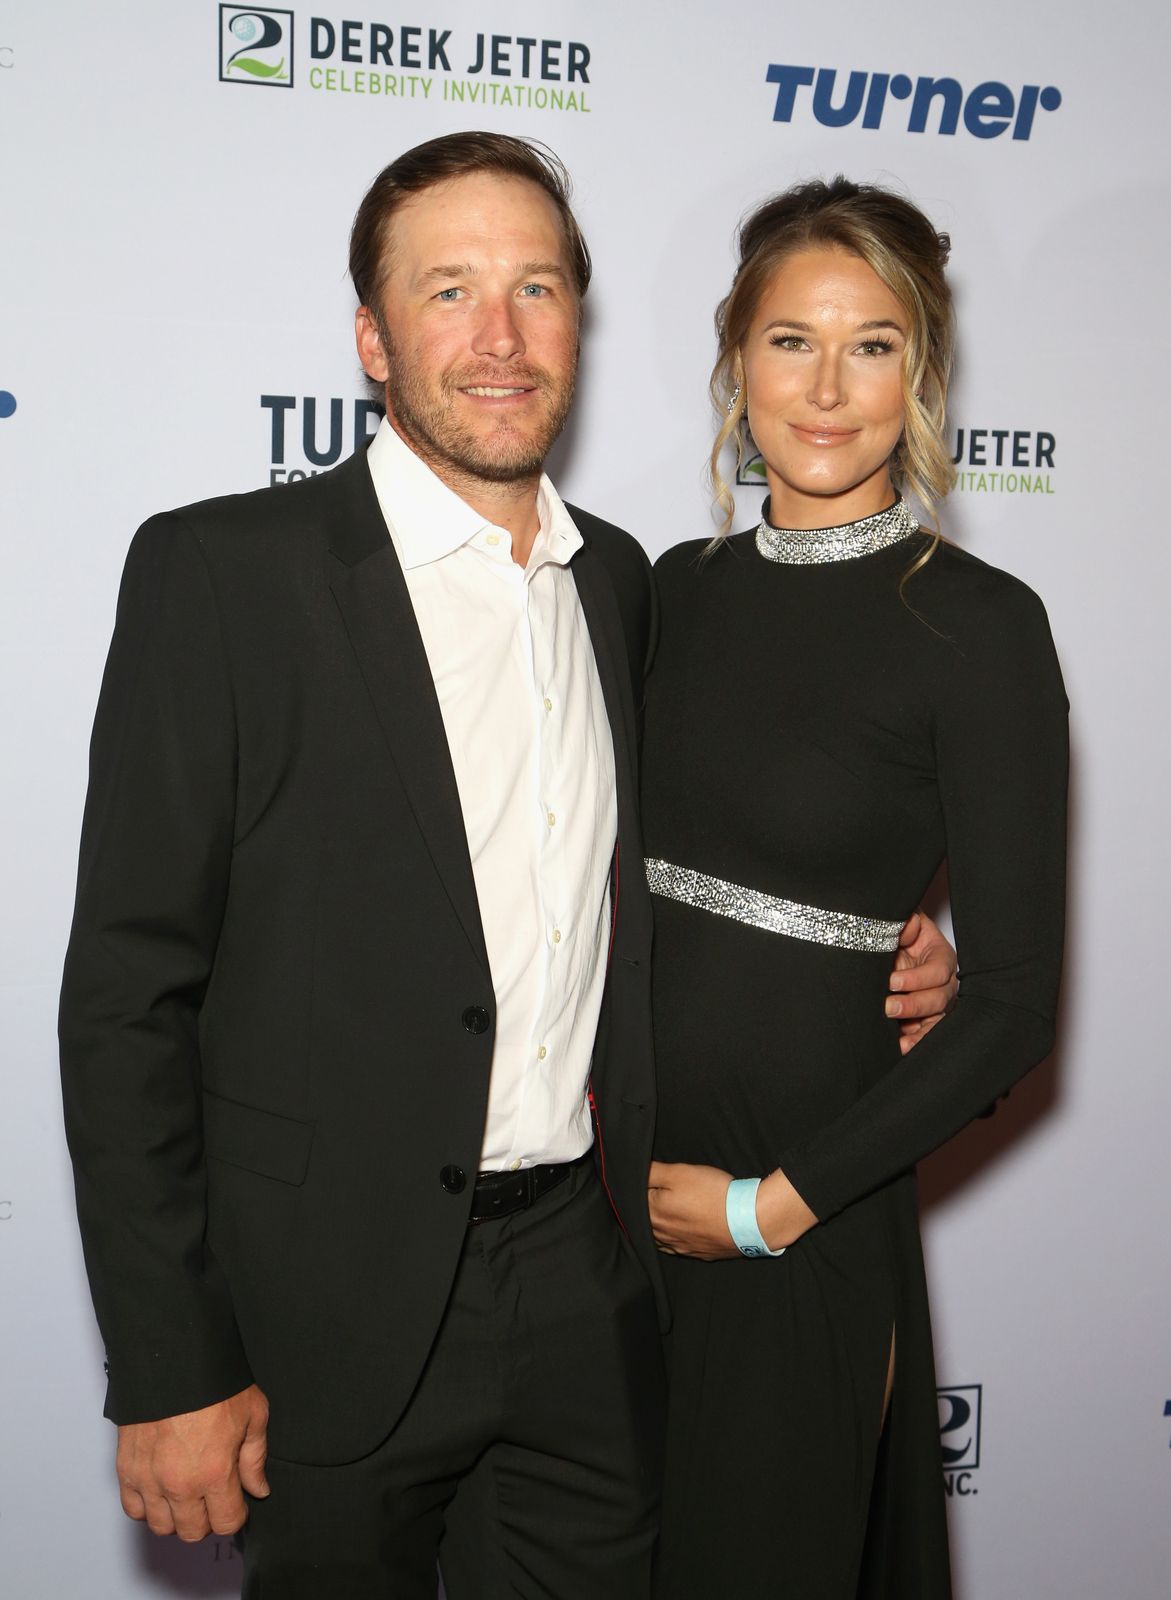 Bode Miller and his wife Morgan Beck, attend the 2018 Derek Jeter Celebrity Invitational gala at the Aria Resort & Casino on April 19, 2018 in Las Vegas, Nevada. | Photo: Getty Images.